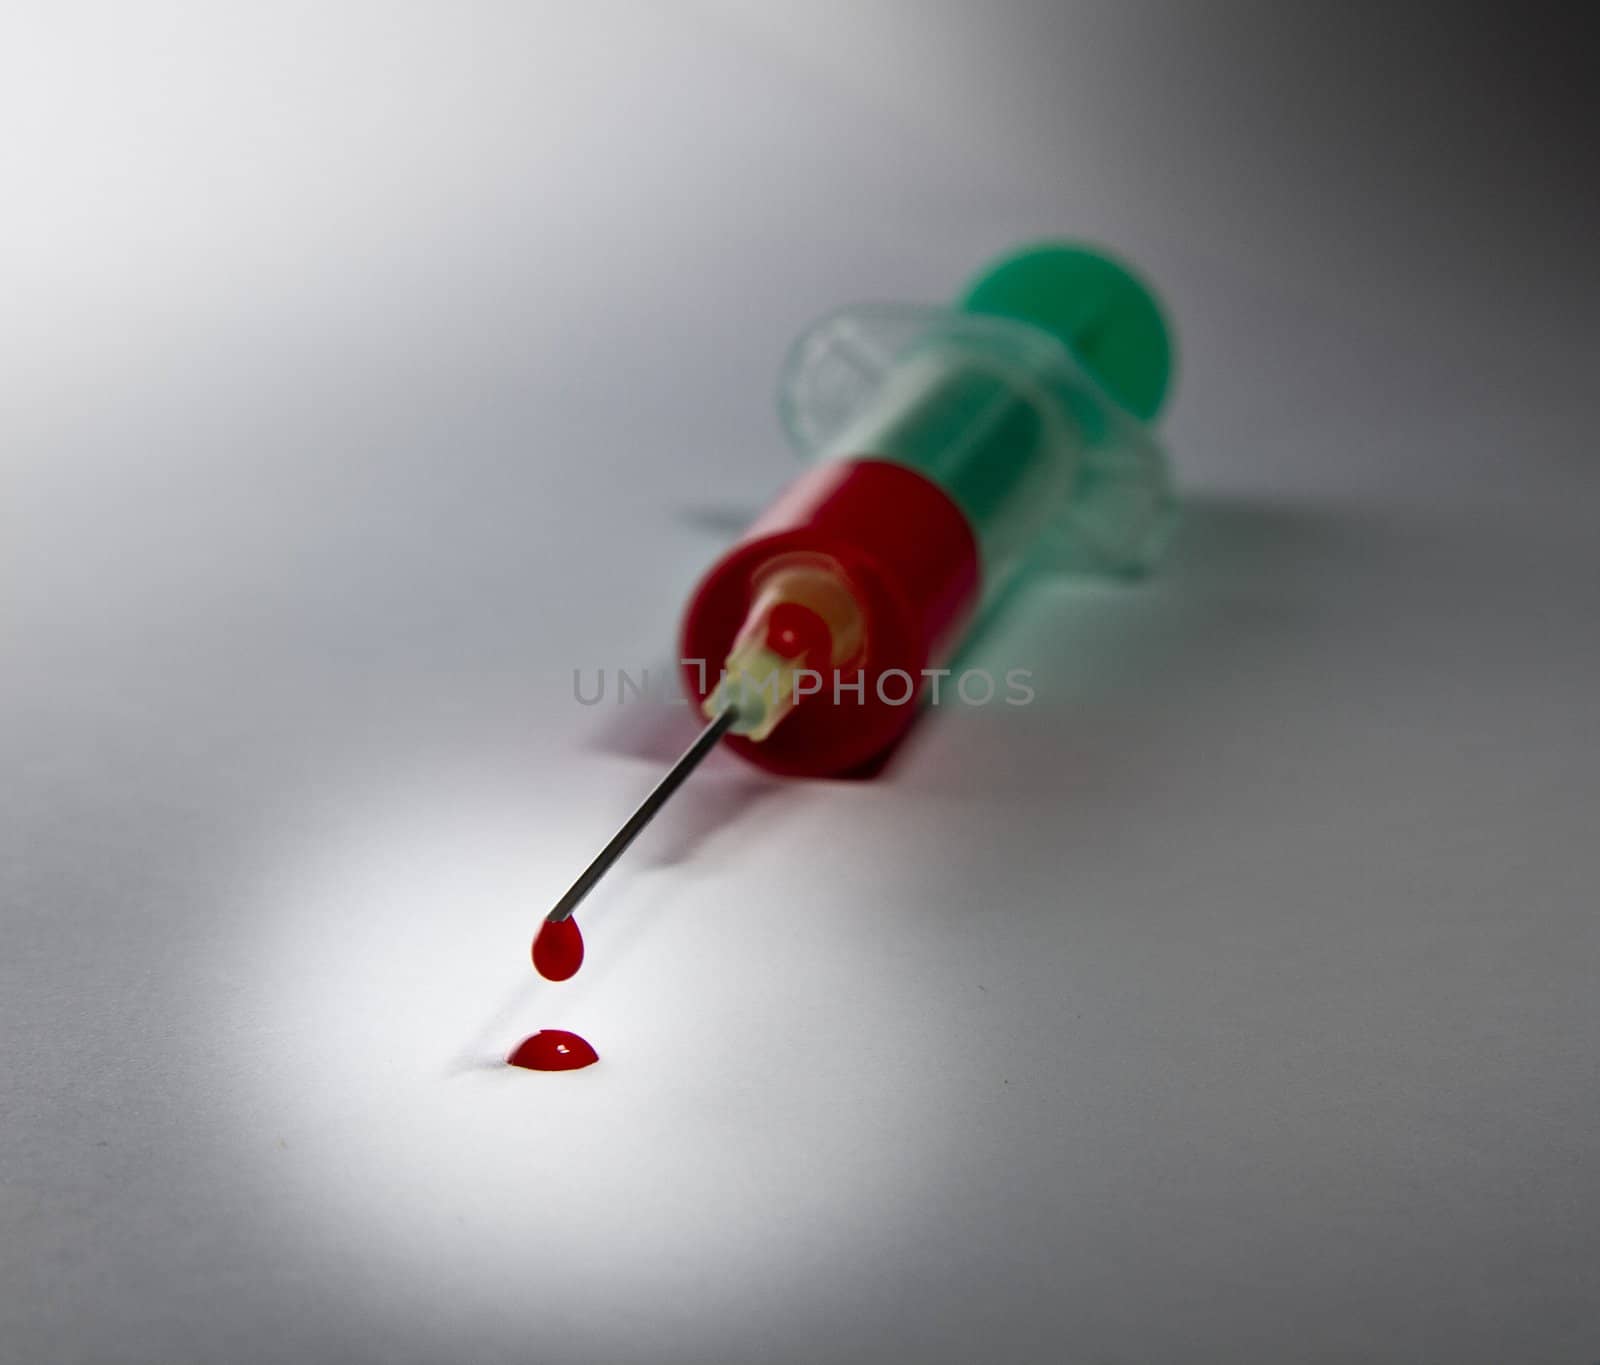 syringe laying on table filled with blood. Focus on needle